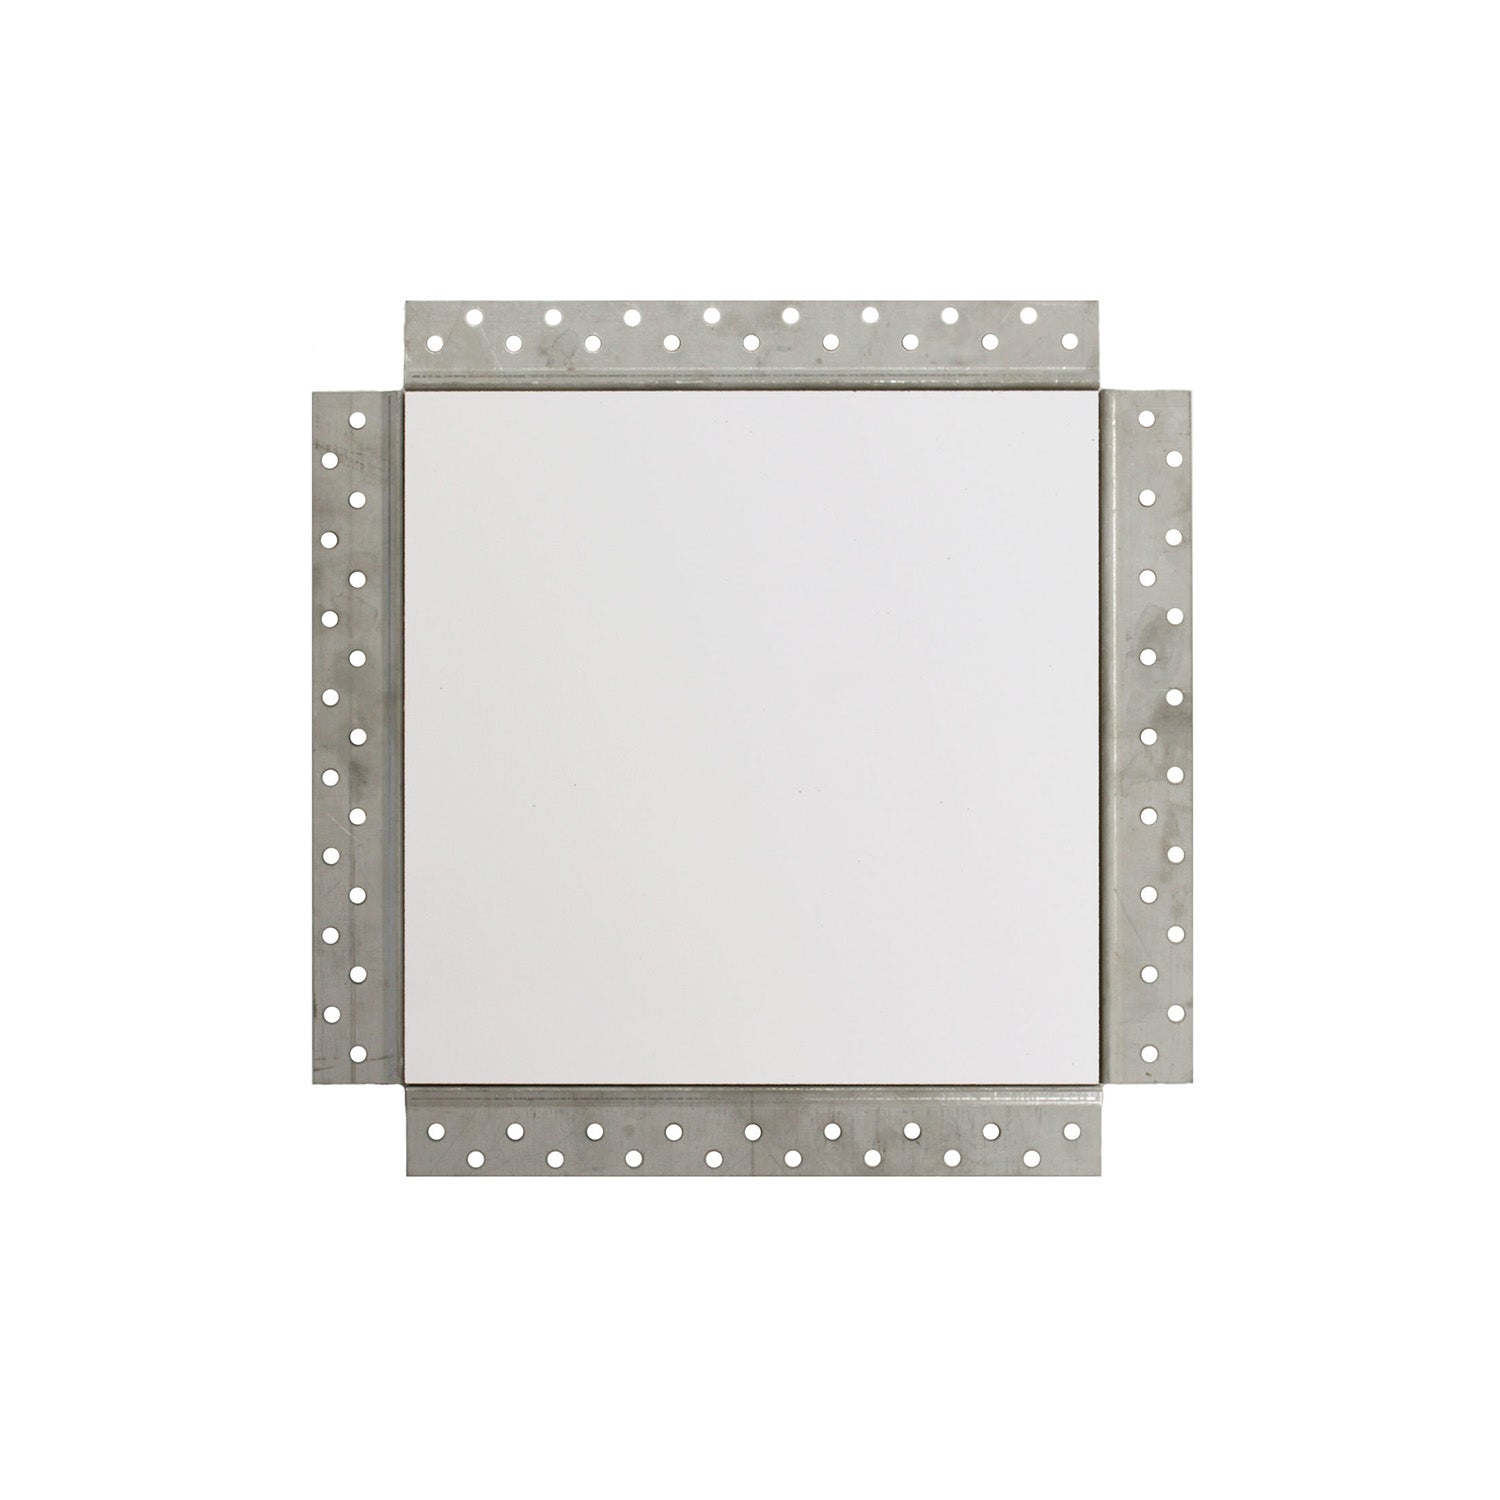 ENVISIVENT (CB5006) – Magnetic Mud-In Flush Mounted Access Panel, For 10” x 10” Drywall Opening